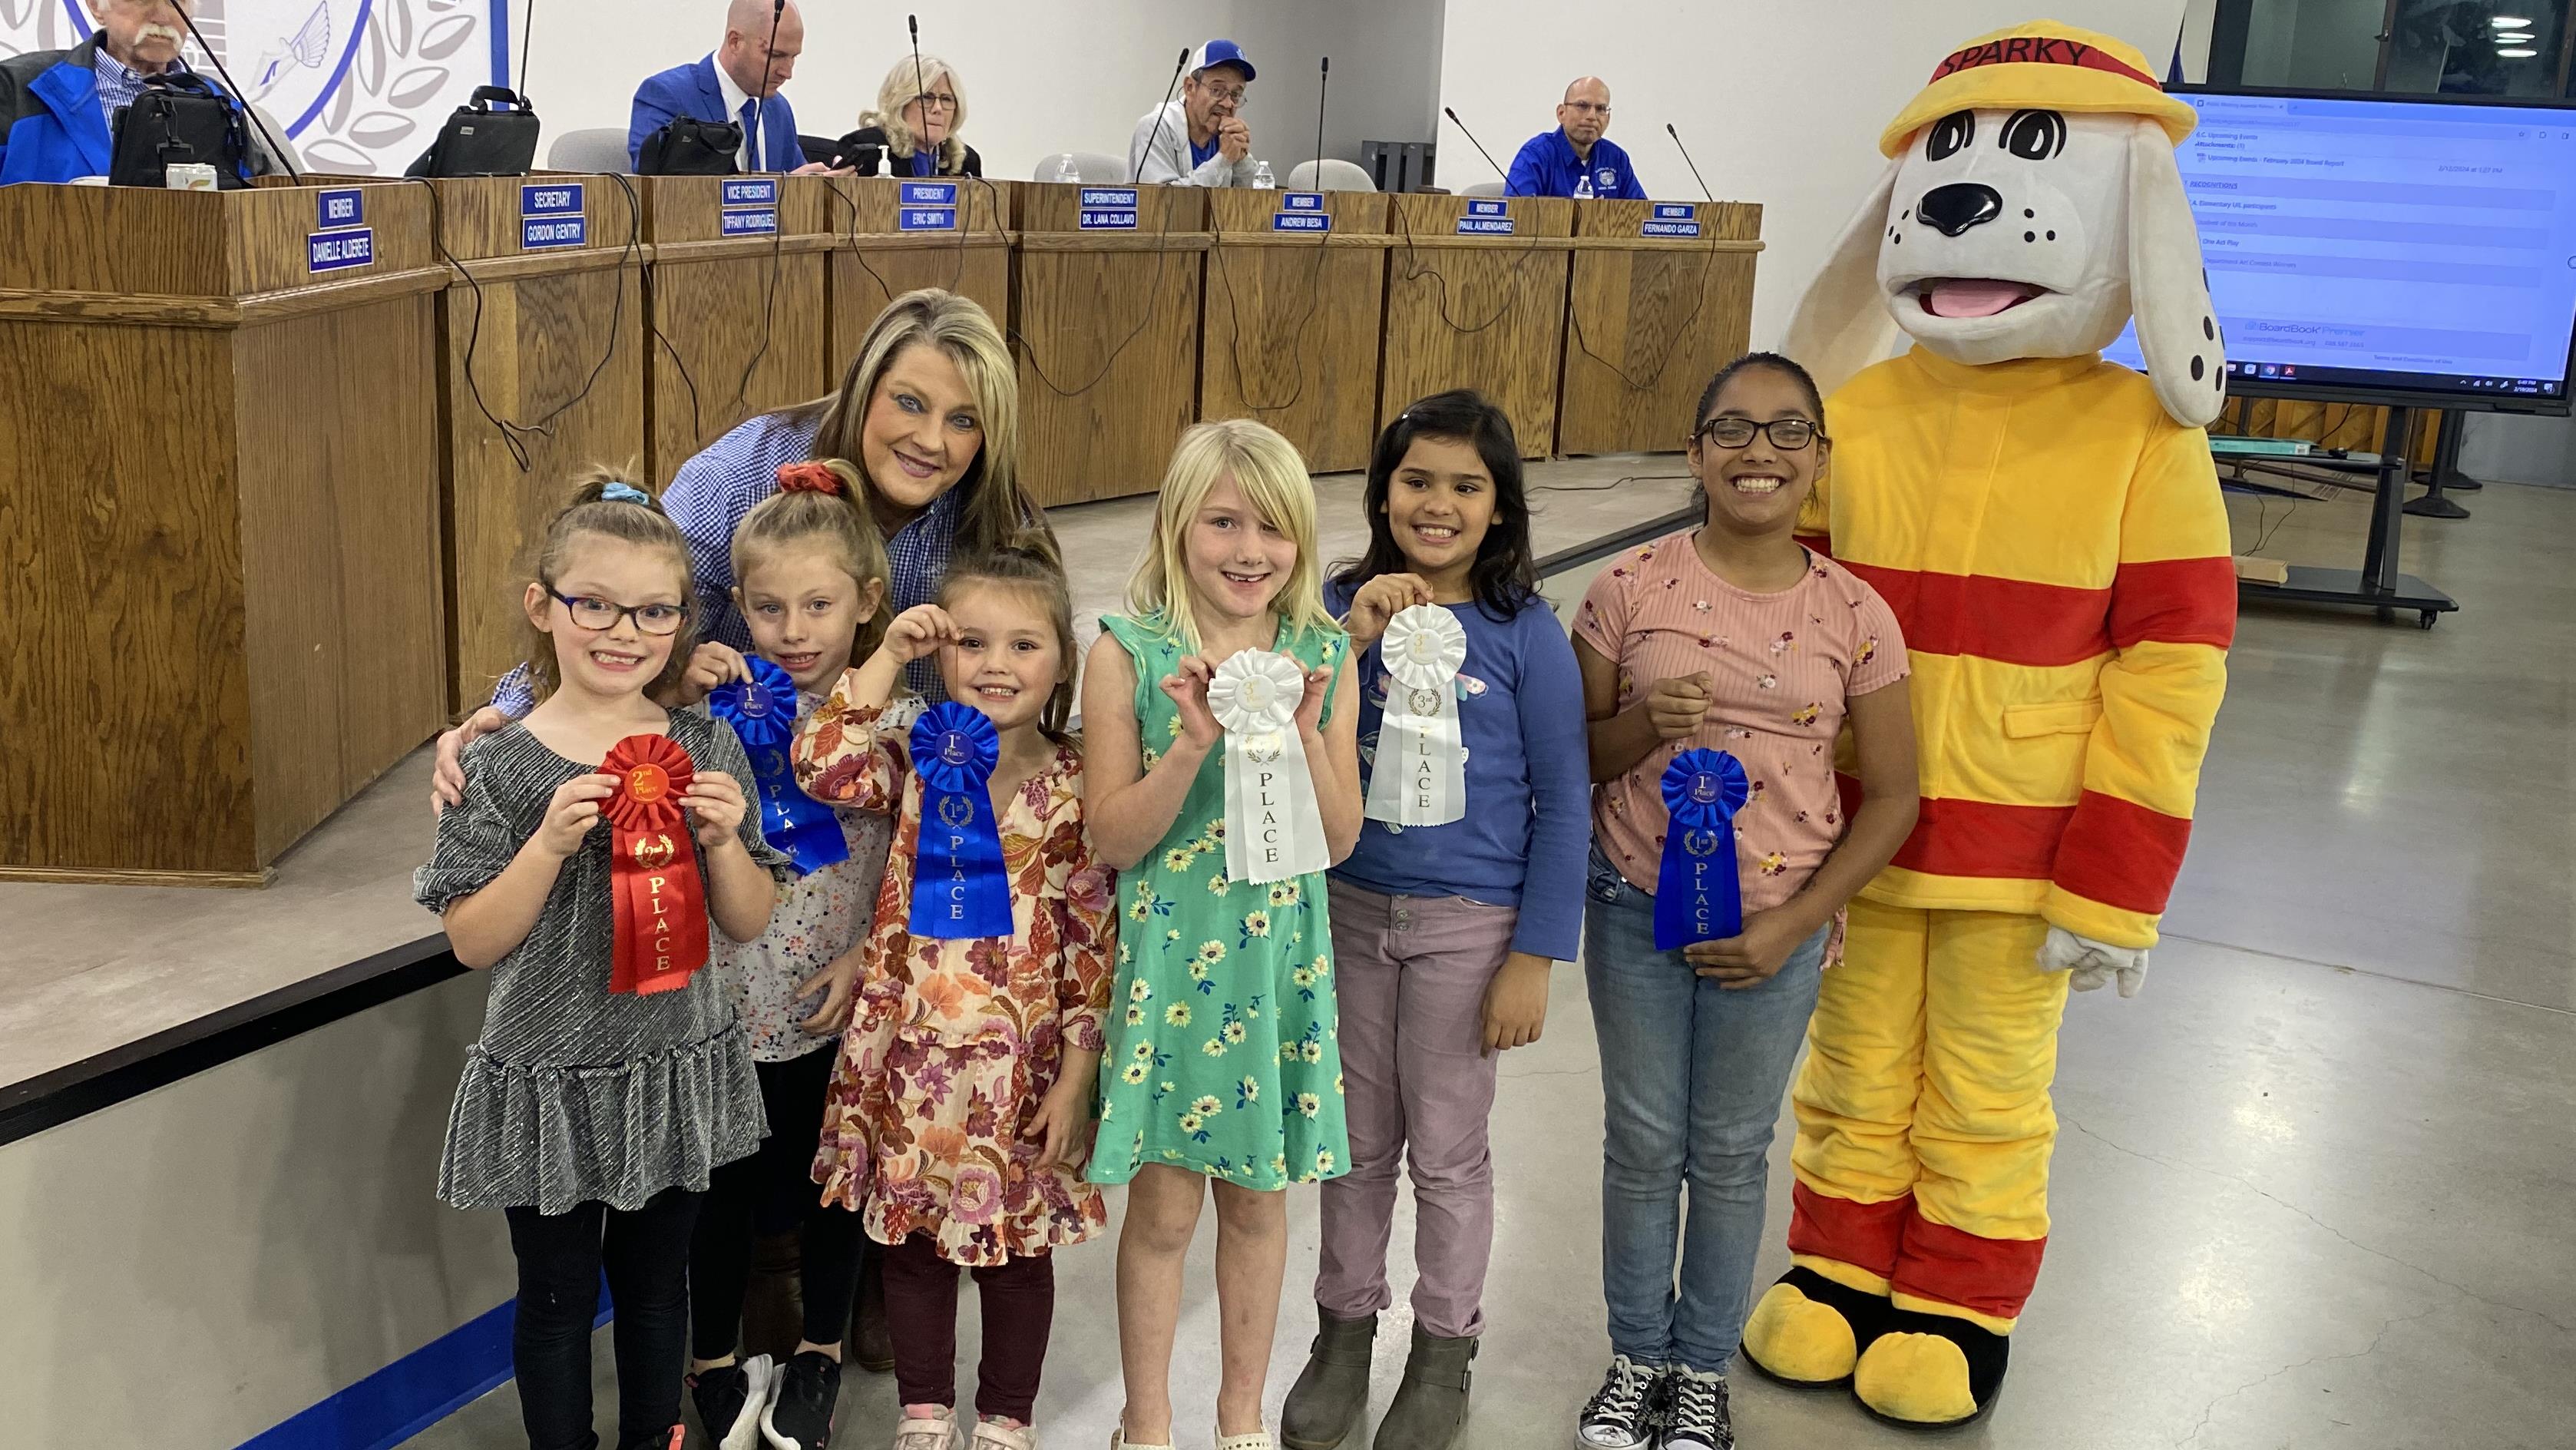 Fire Department Poster Contest Winners